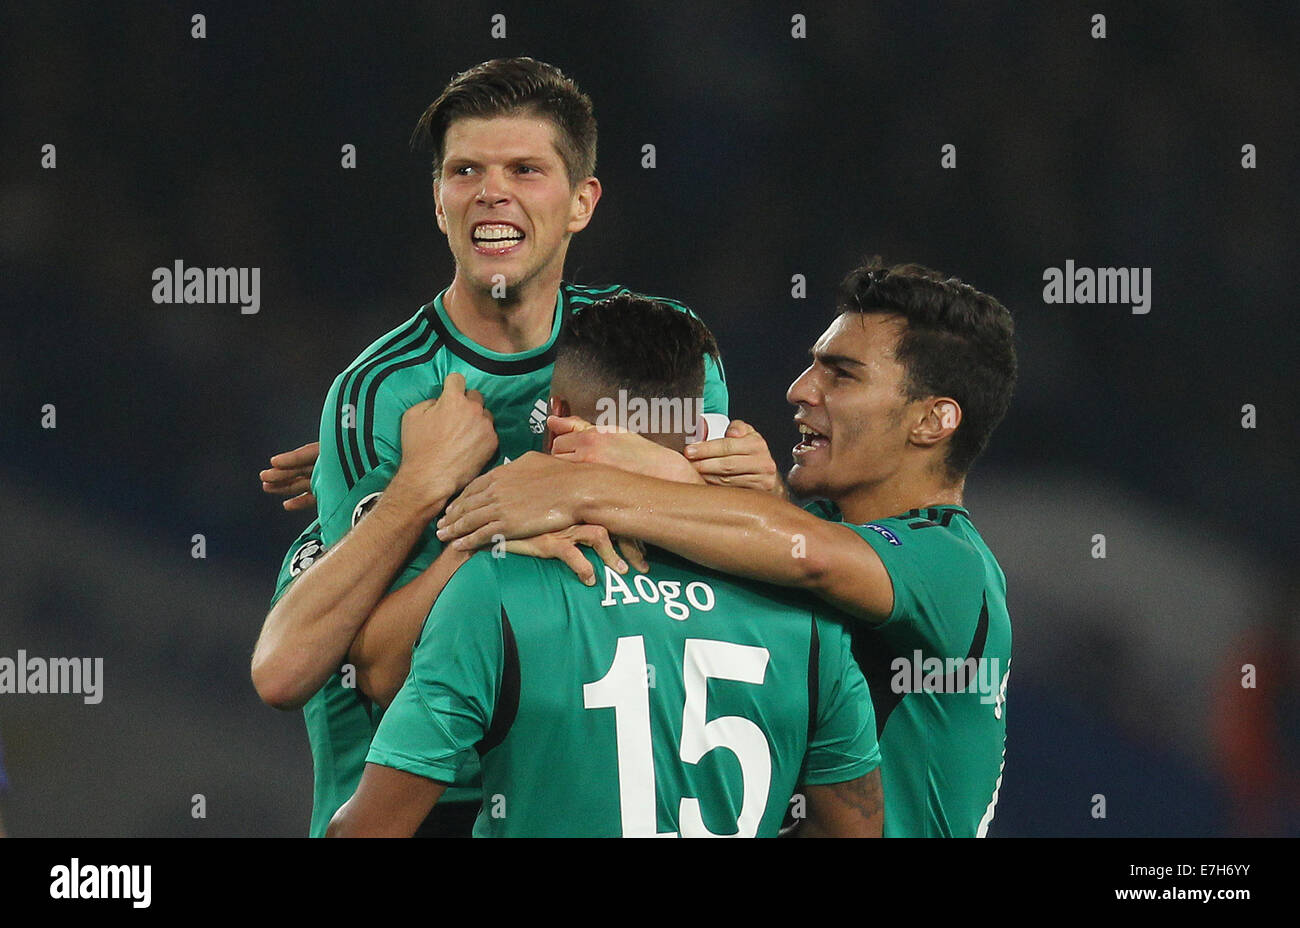 London, Britain. 17th Sep, 2014. Schalke's Klaas-Jan Huntelaar (l), Dennis Aogo and Kaan Ayhan (r) celebrate a goal against Chelsea during the UEFA Champions League Group G soccer match between Chelsea FC and FC Schalke 04 at Stamford Bridge stadium in London, Britain, 17 September 2014. Photo: Ina Fassbender/dpa/Alamy Live News Stock Photo